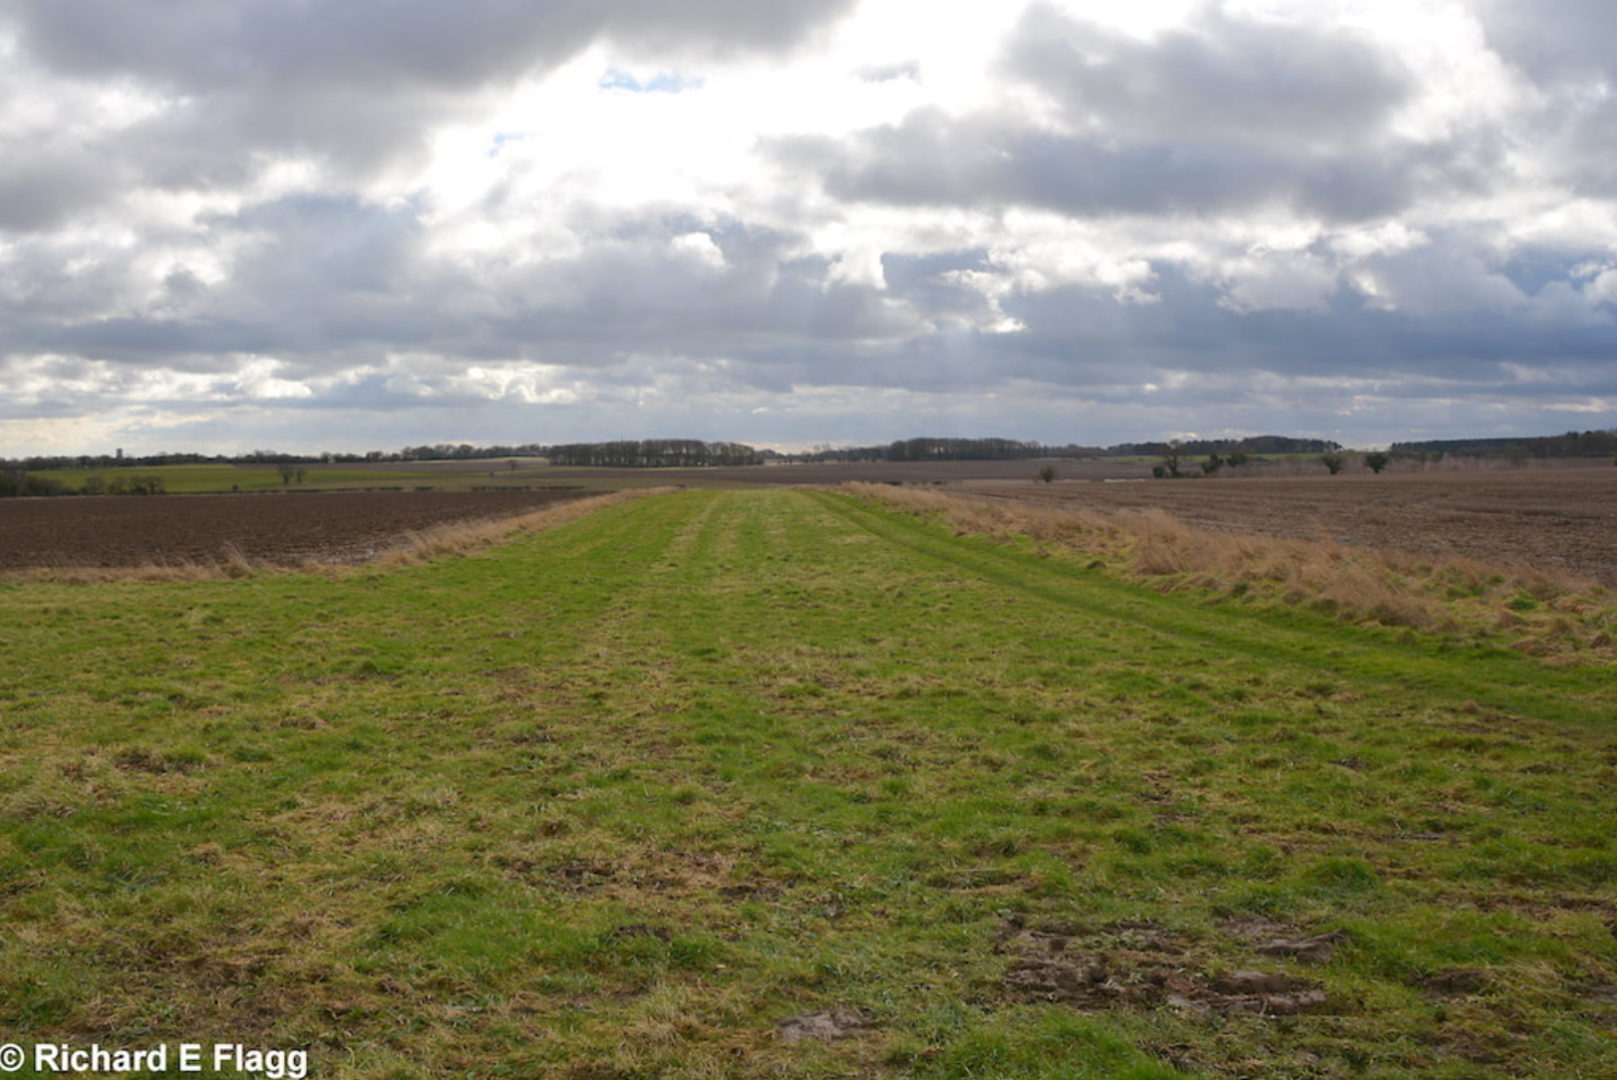 004Runway 18:36. Looking south from the runway 18 threshold - 11 February 2018.png